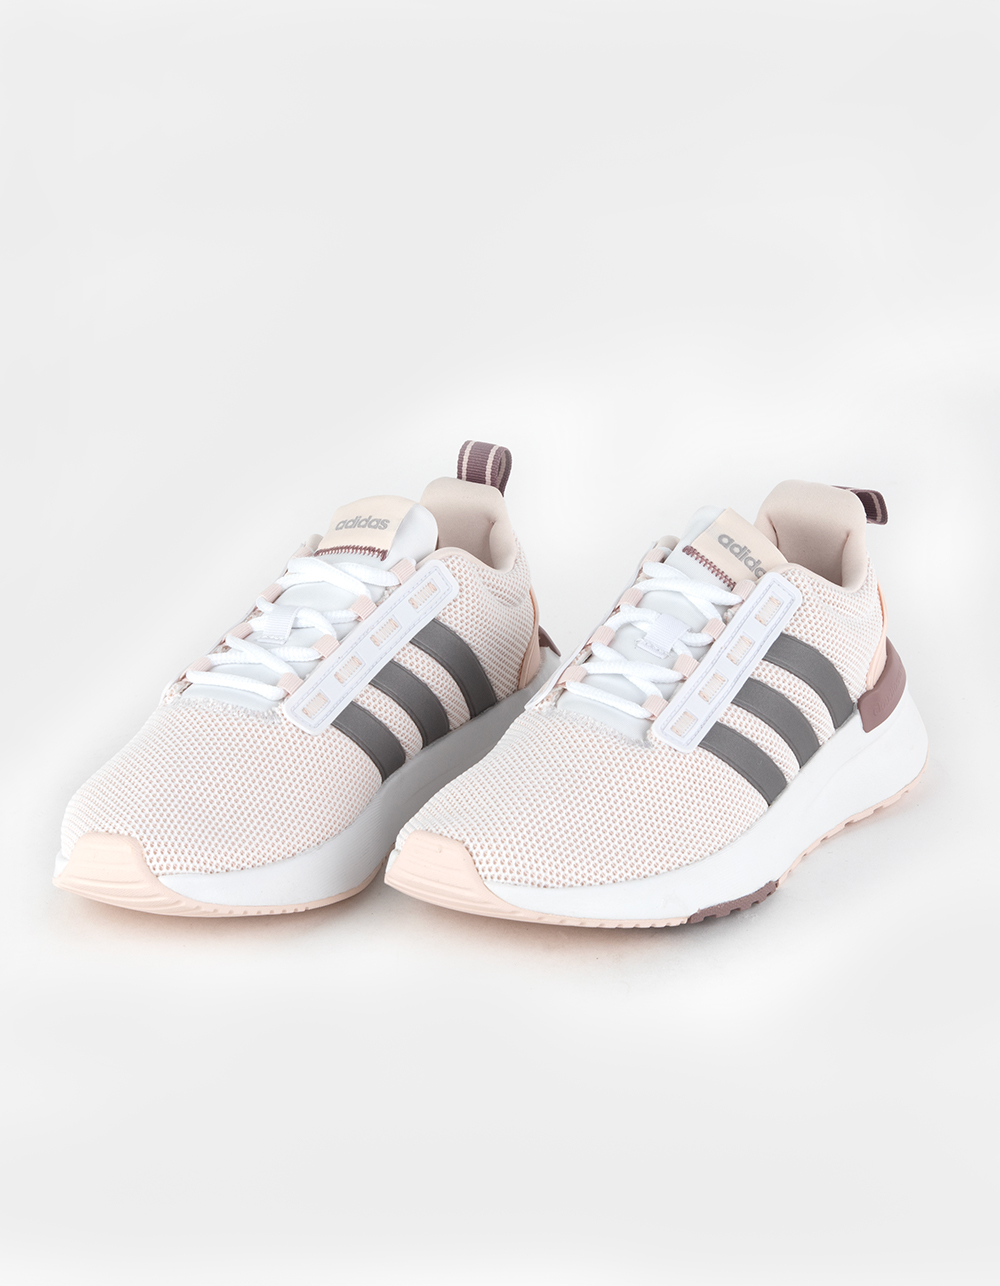 ADIDAS Racer TR21 Womens Shoes - WHITE